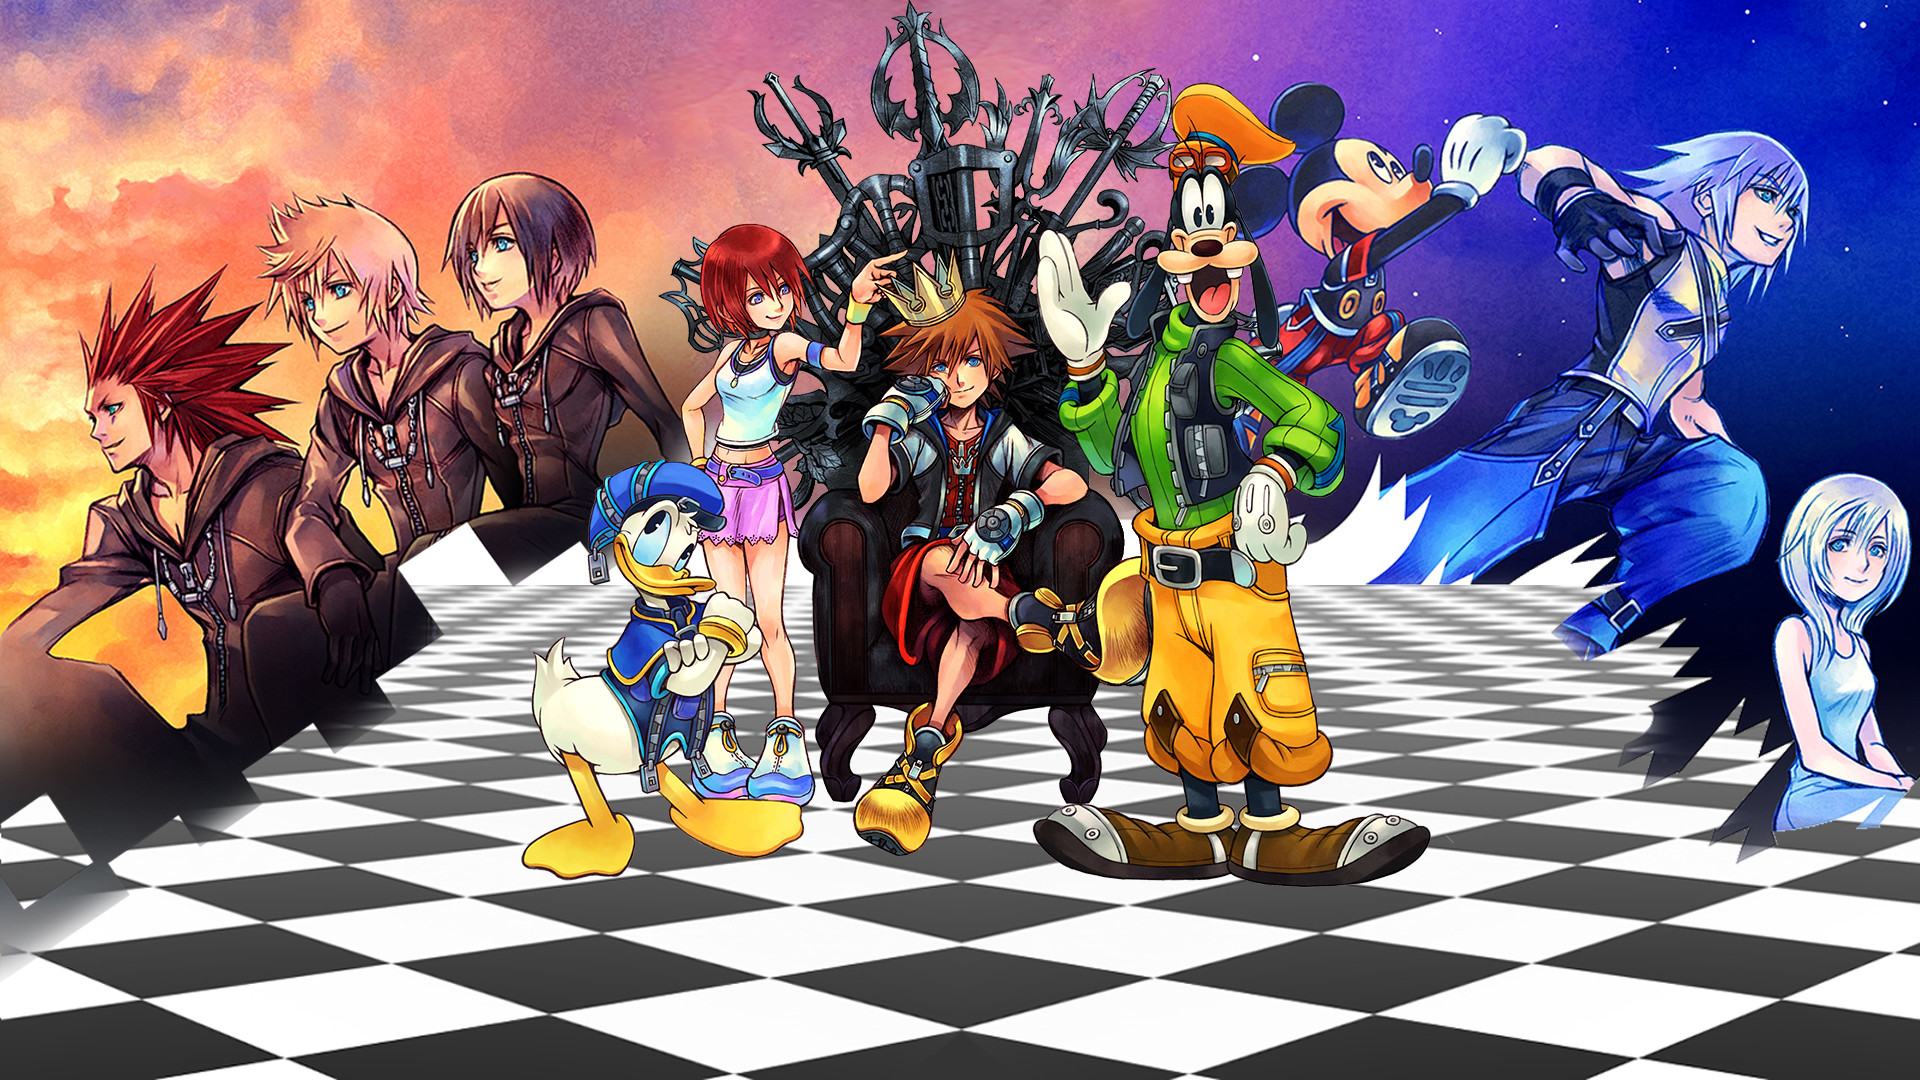 1920x1080 Rumor: New Kingdom Hearts 3 trailer to be featured at E3 2016 - GameZone